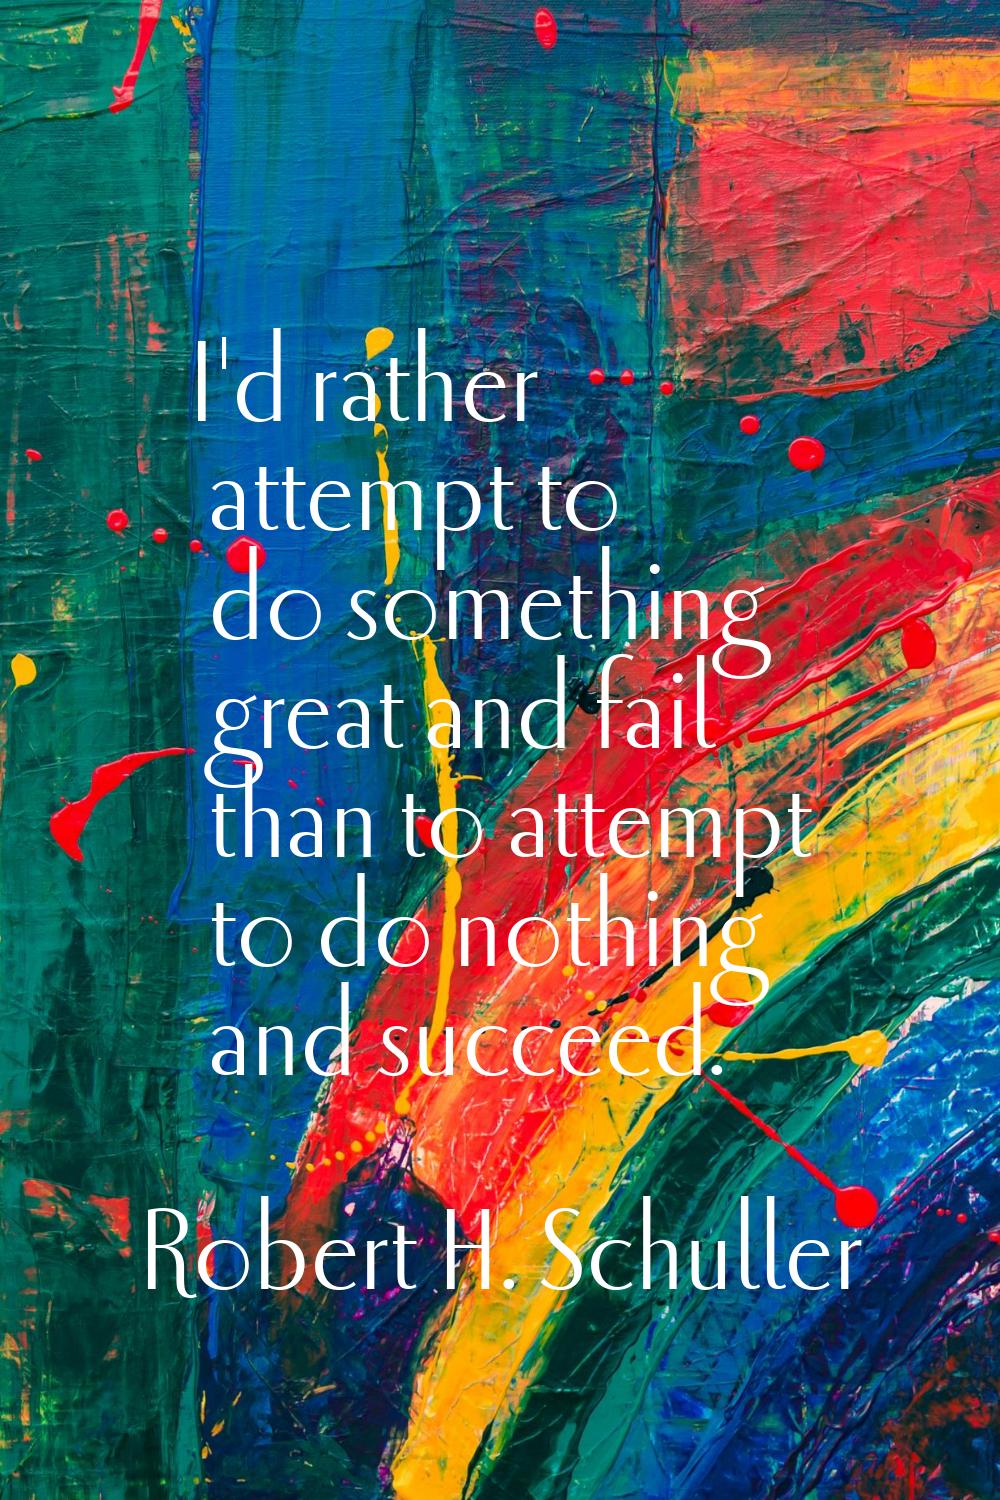 I'd rather attempt to do something great and fail than to attempt to do nothing and succeed.